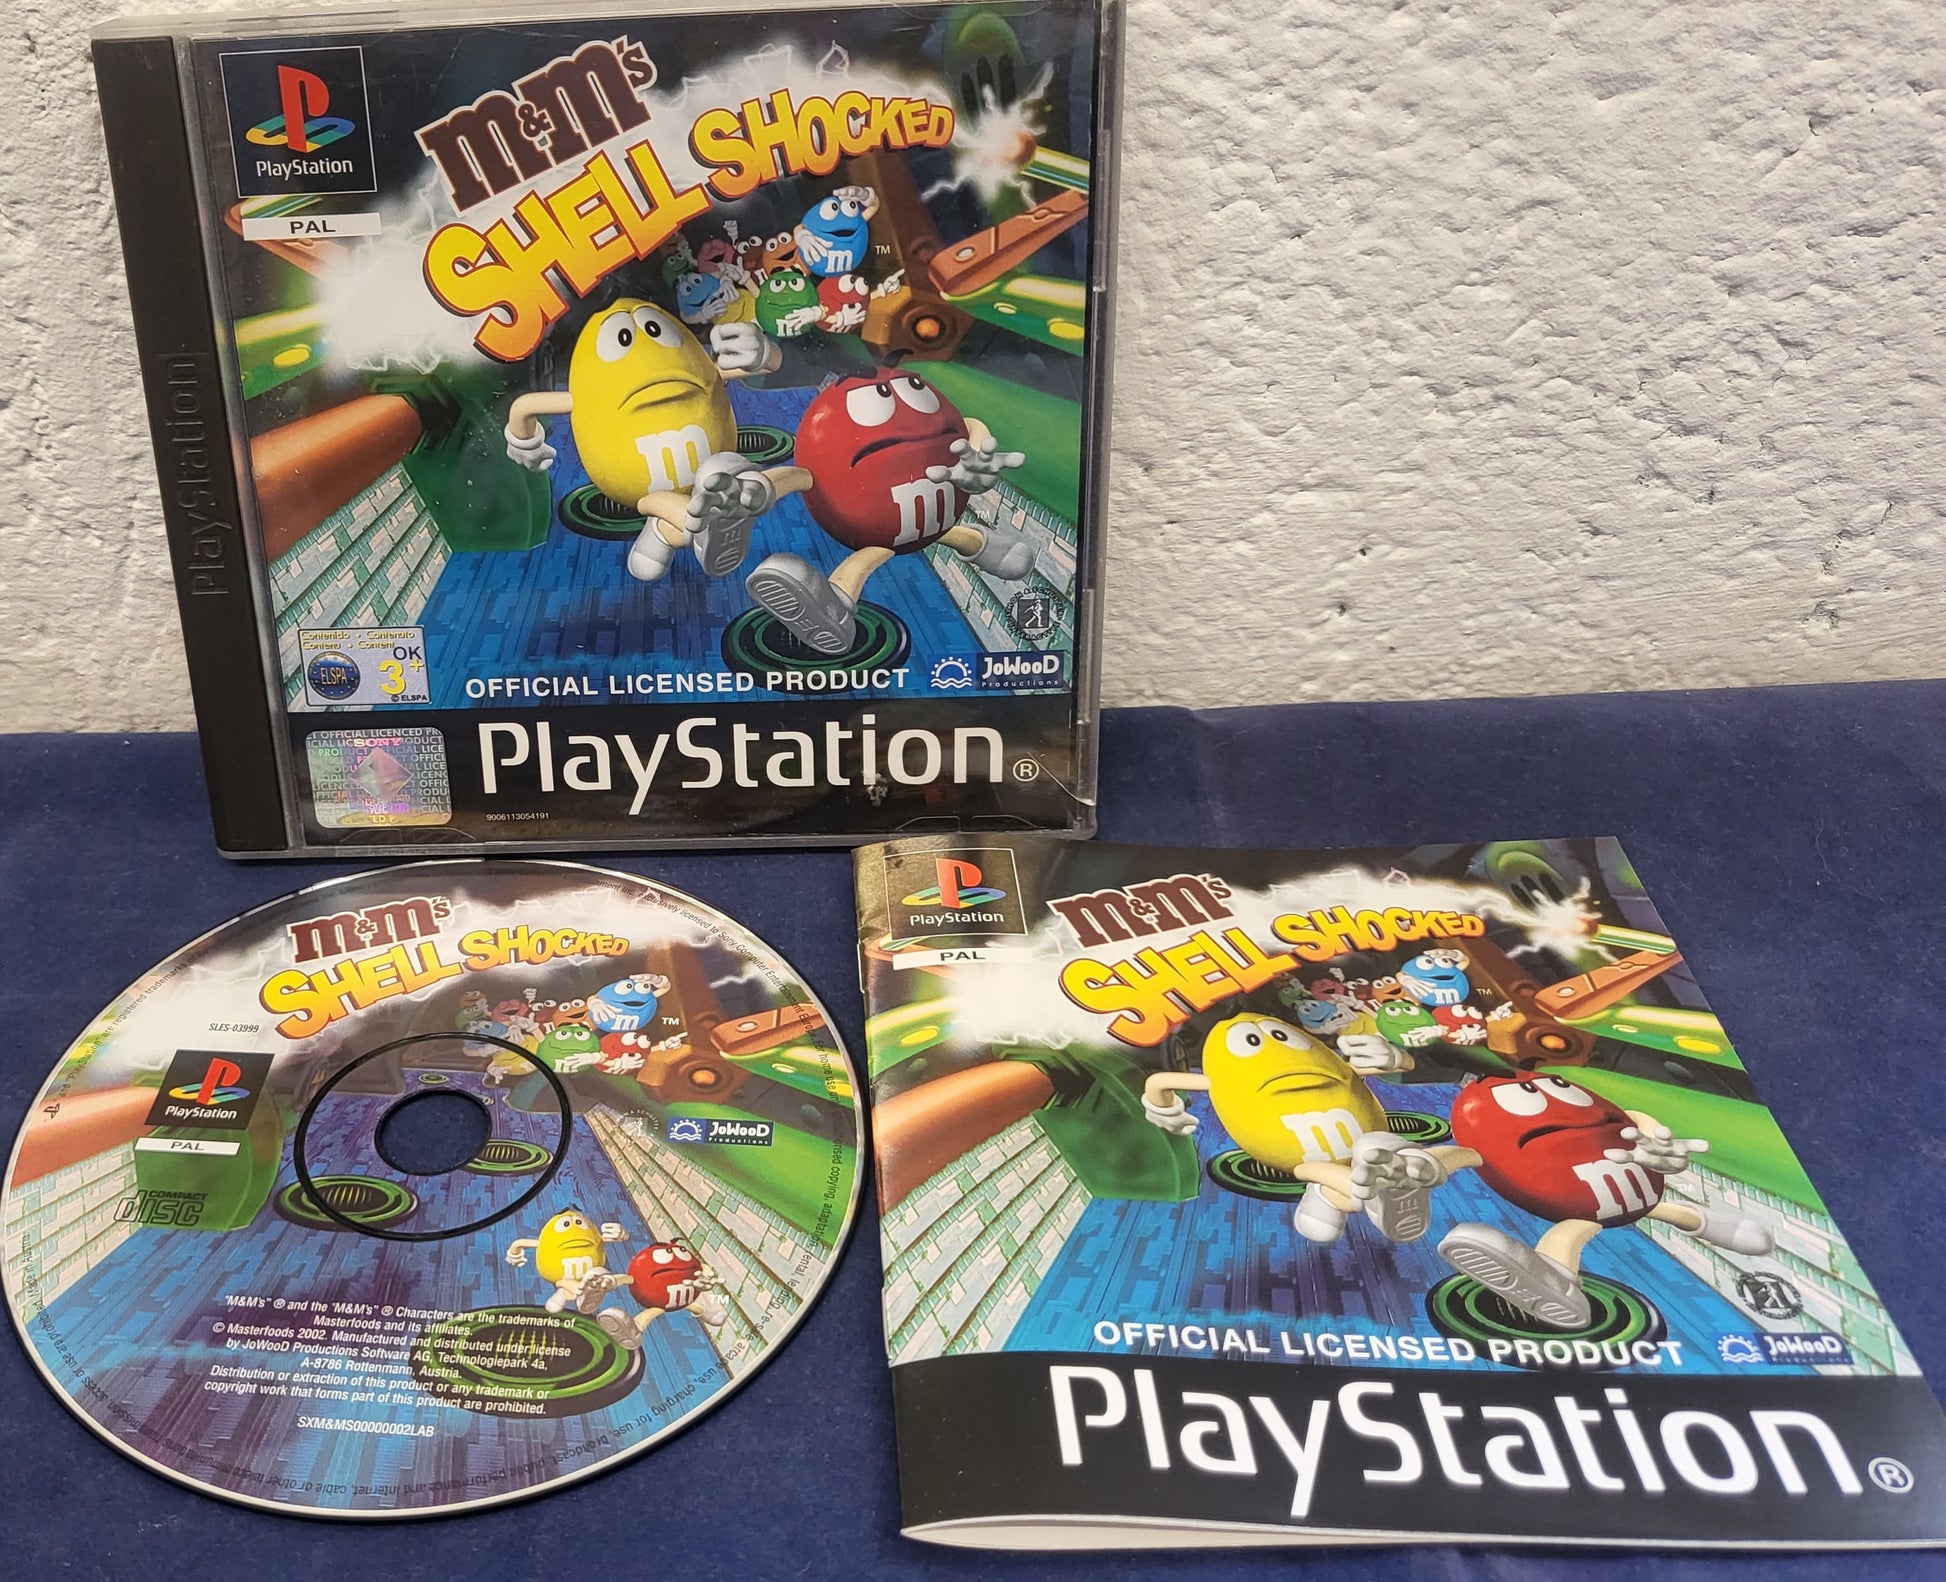 ShellShock (Sony Playstation 1 PS1) Shell Shock Game Disc TESTED